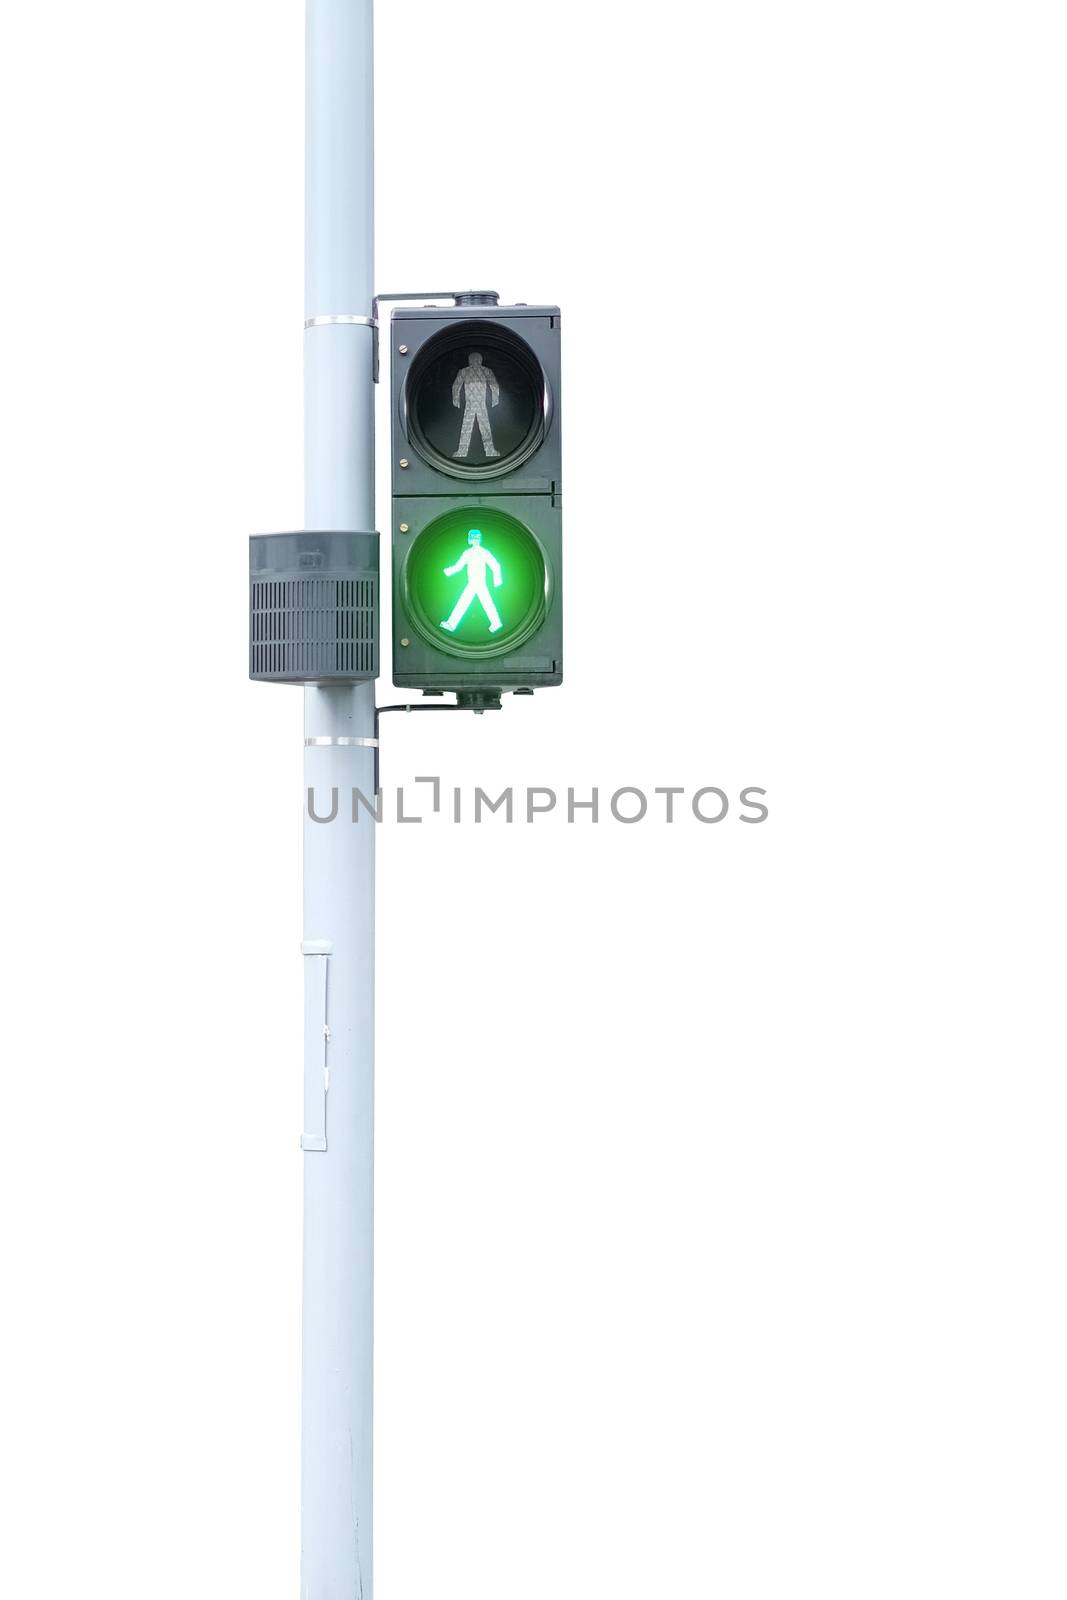 Traffic lights, green signal, go on white background with clippi by Surasak